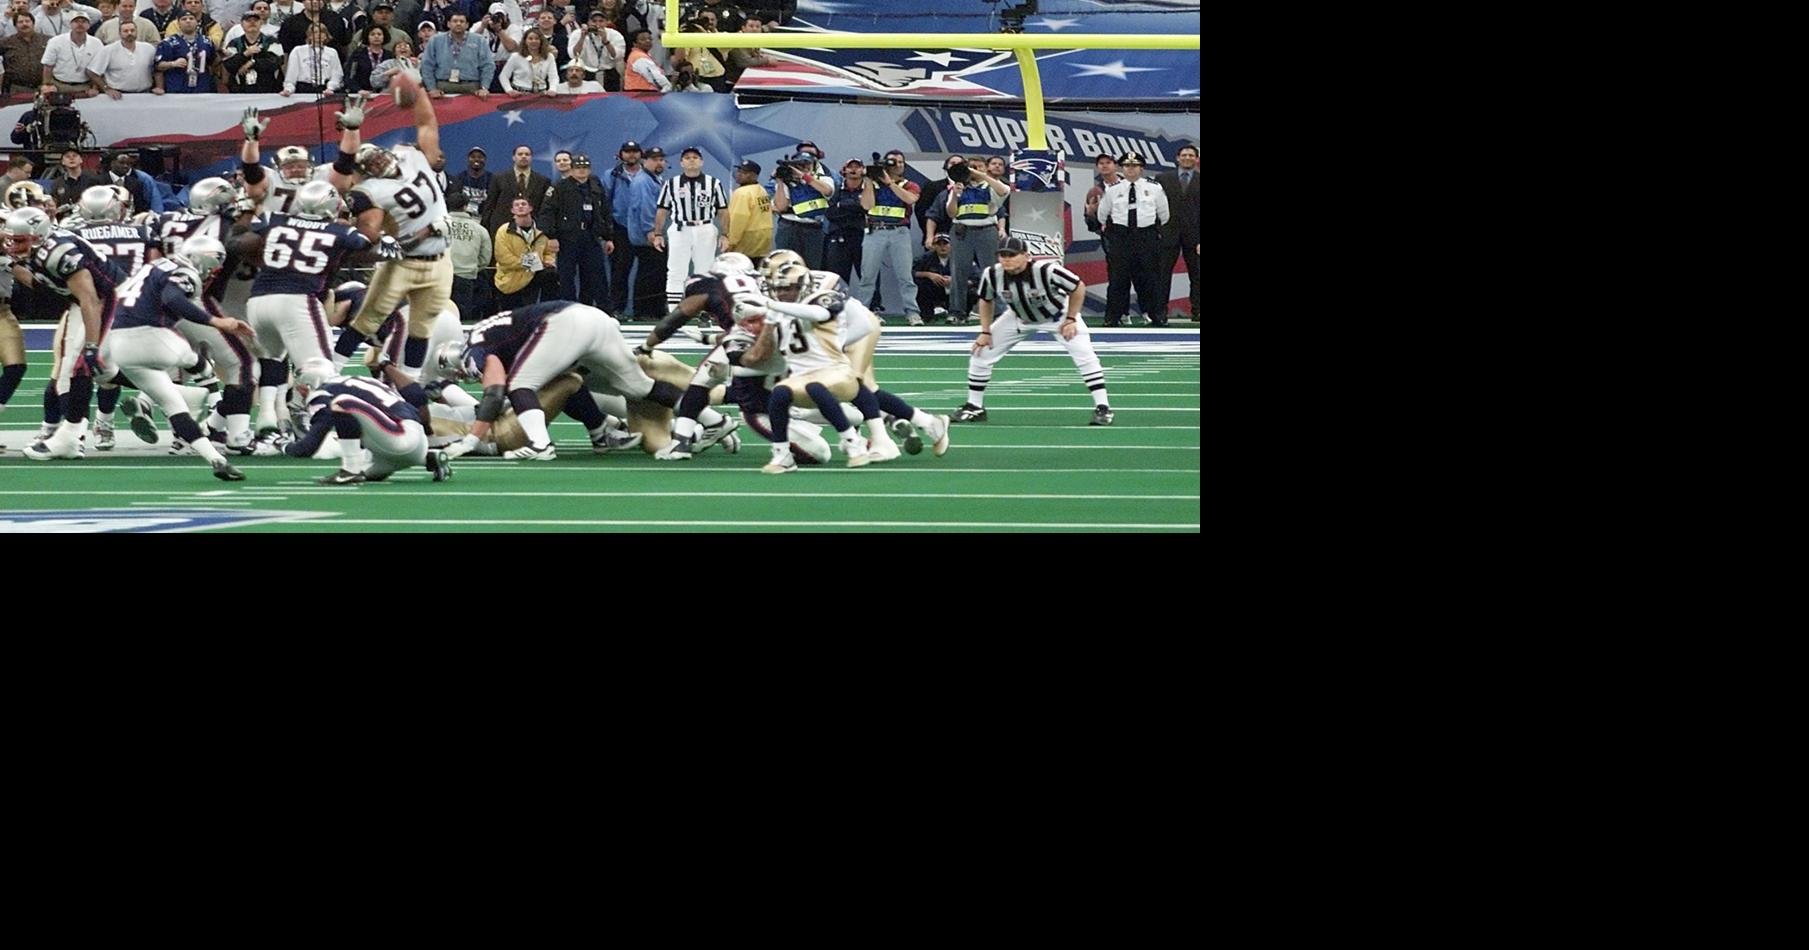 The World in 2002: The Rams vs. the Patriots in Super Bowl 36